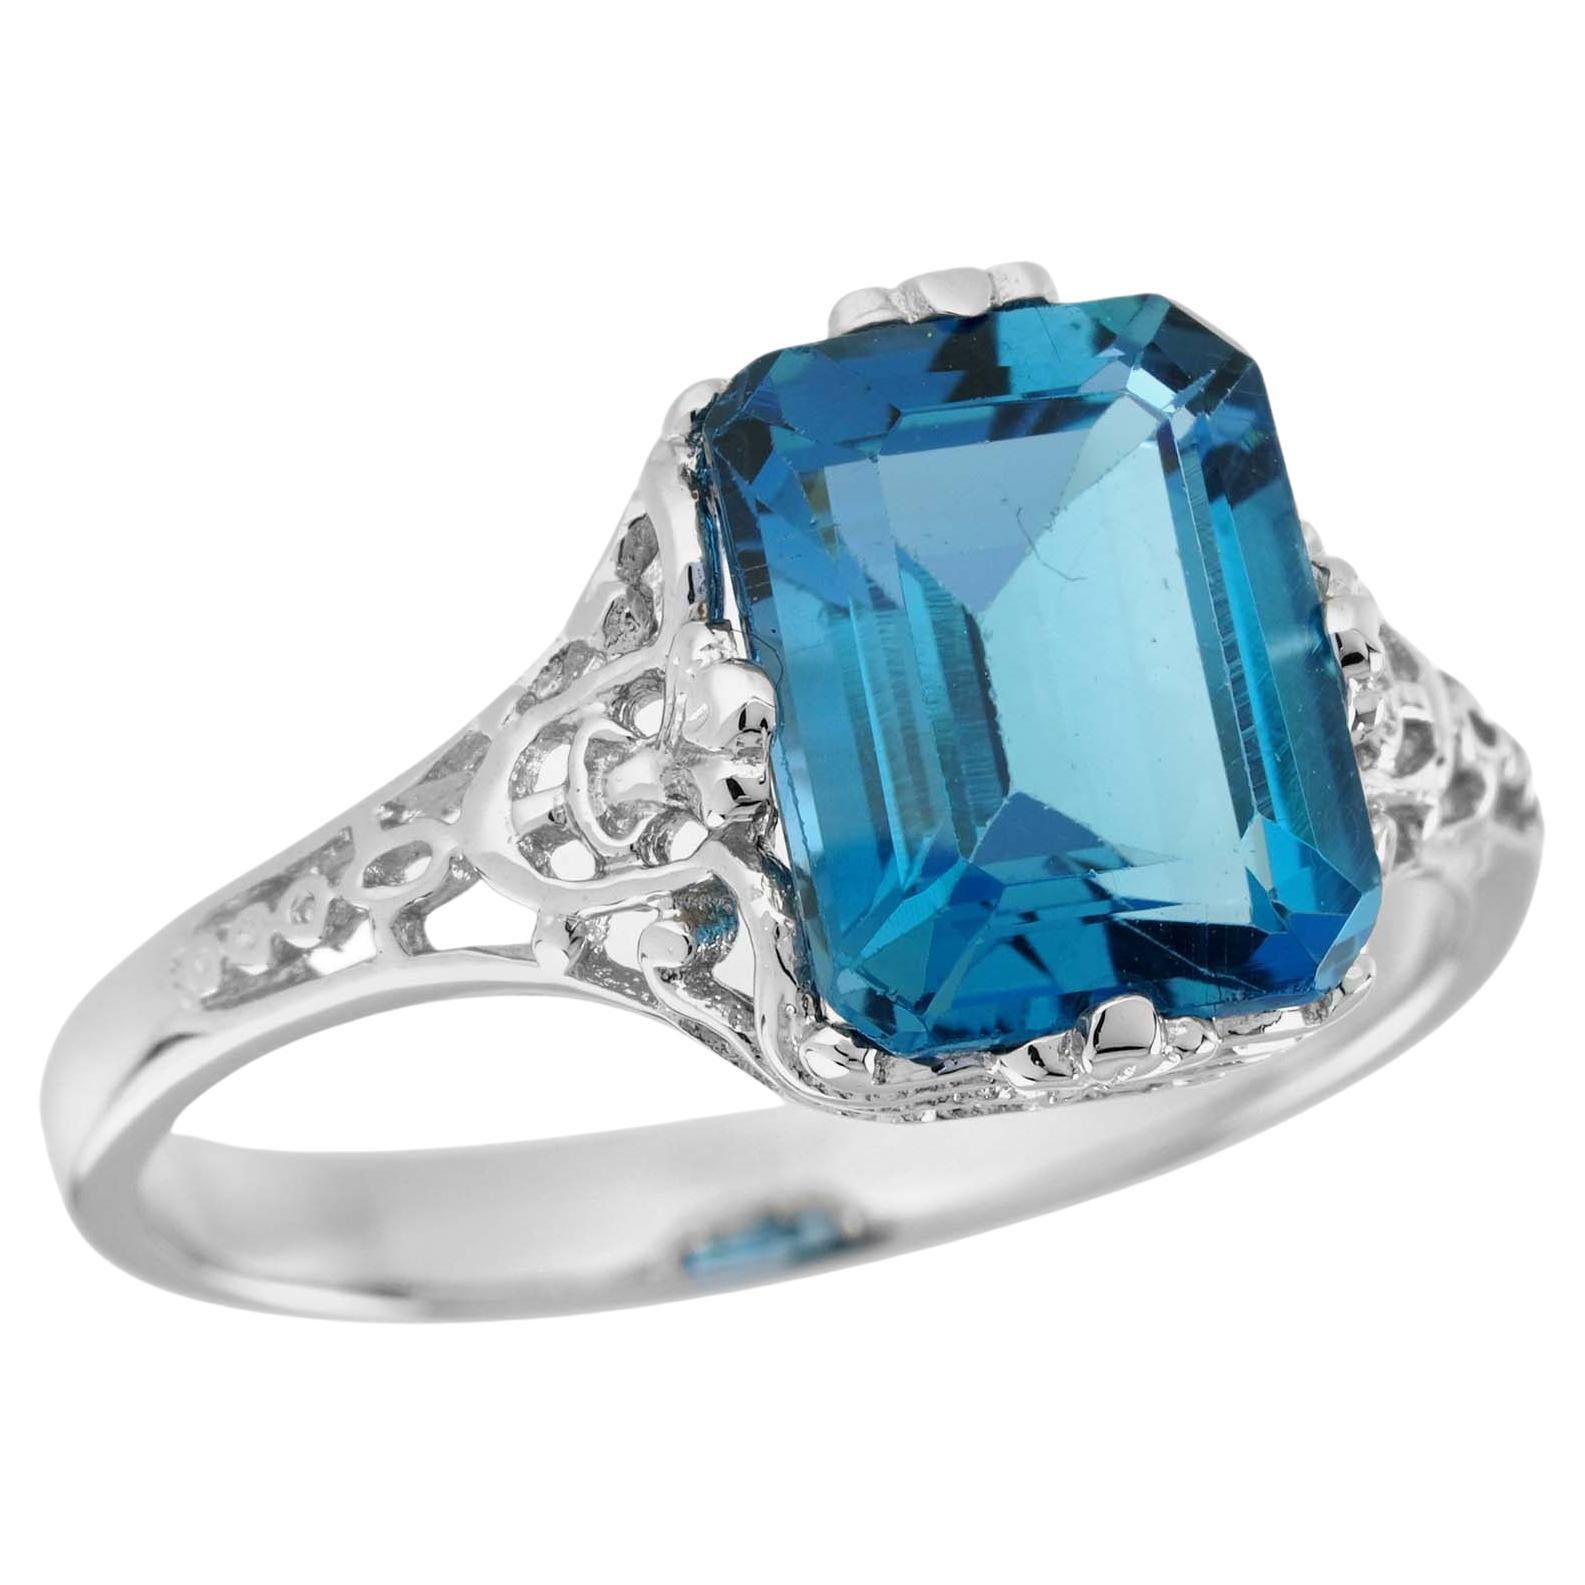 For Sale:  4.5 Ct. Natural London Blue Topaz Vintage Style Solitaire Ring in 9K White Gold